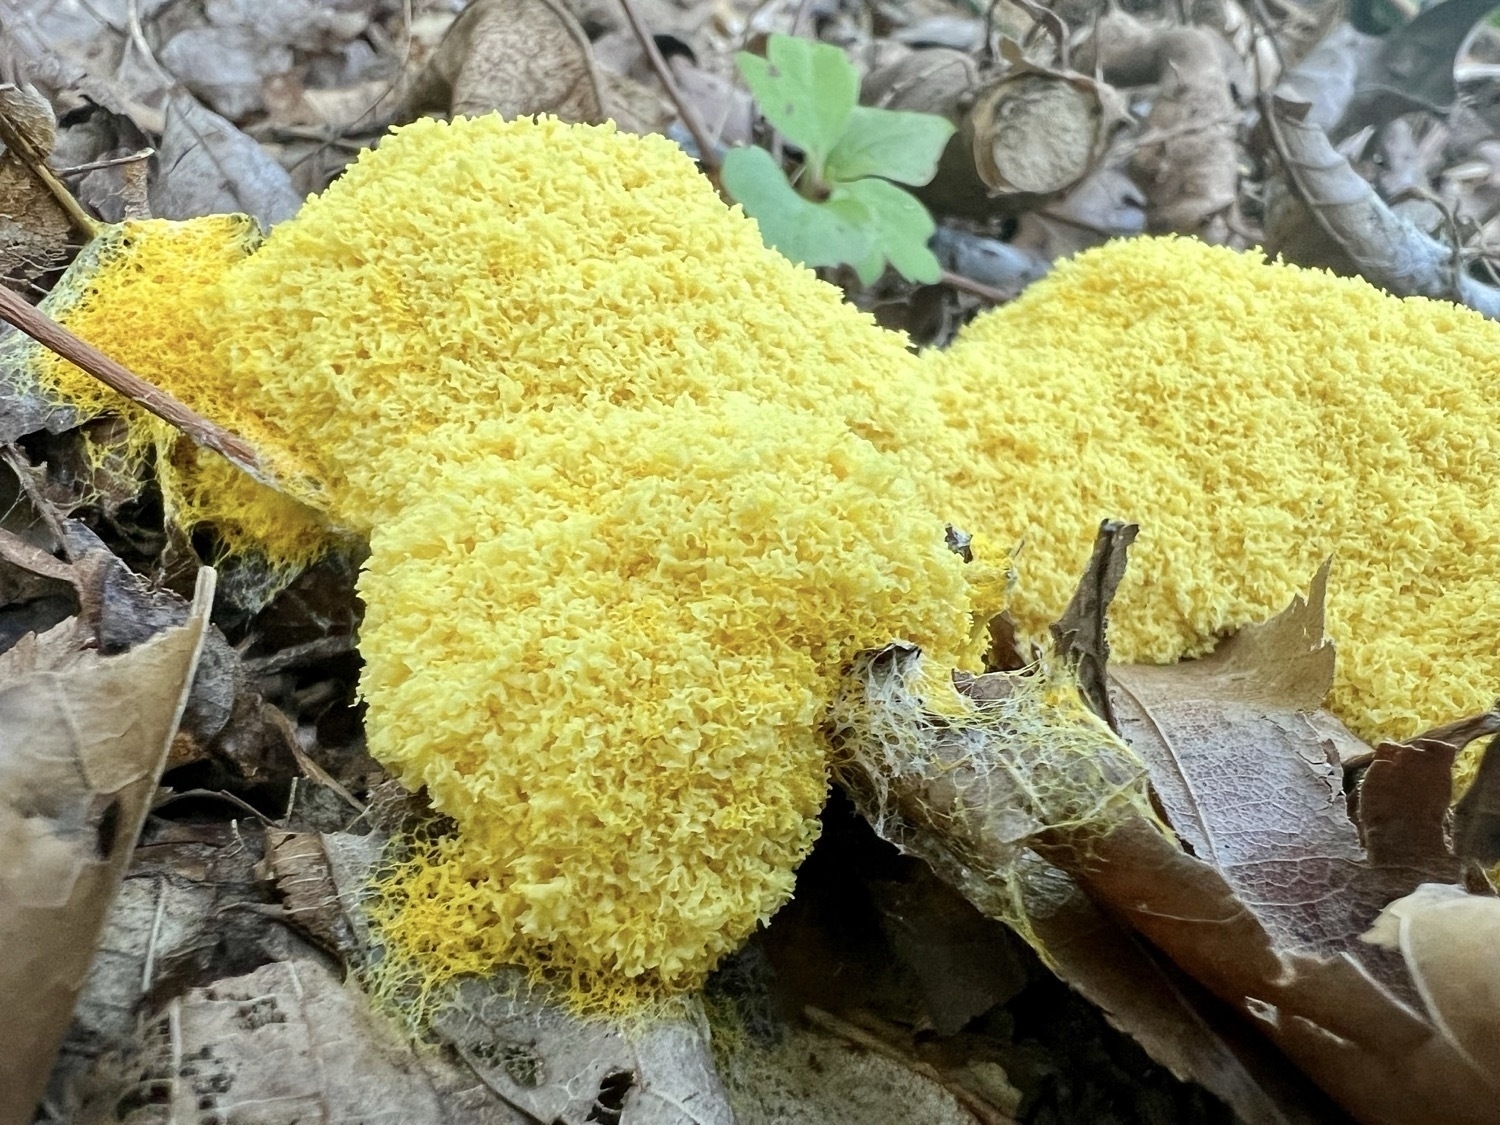 Yellow slime mold growing on fallen brown leaves. The yellow mold viewed close up is ruffled and where it is growing onto the leaves it creates a network of threads.